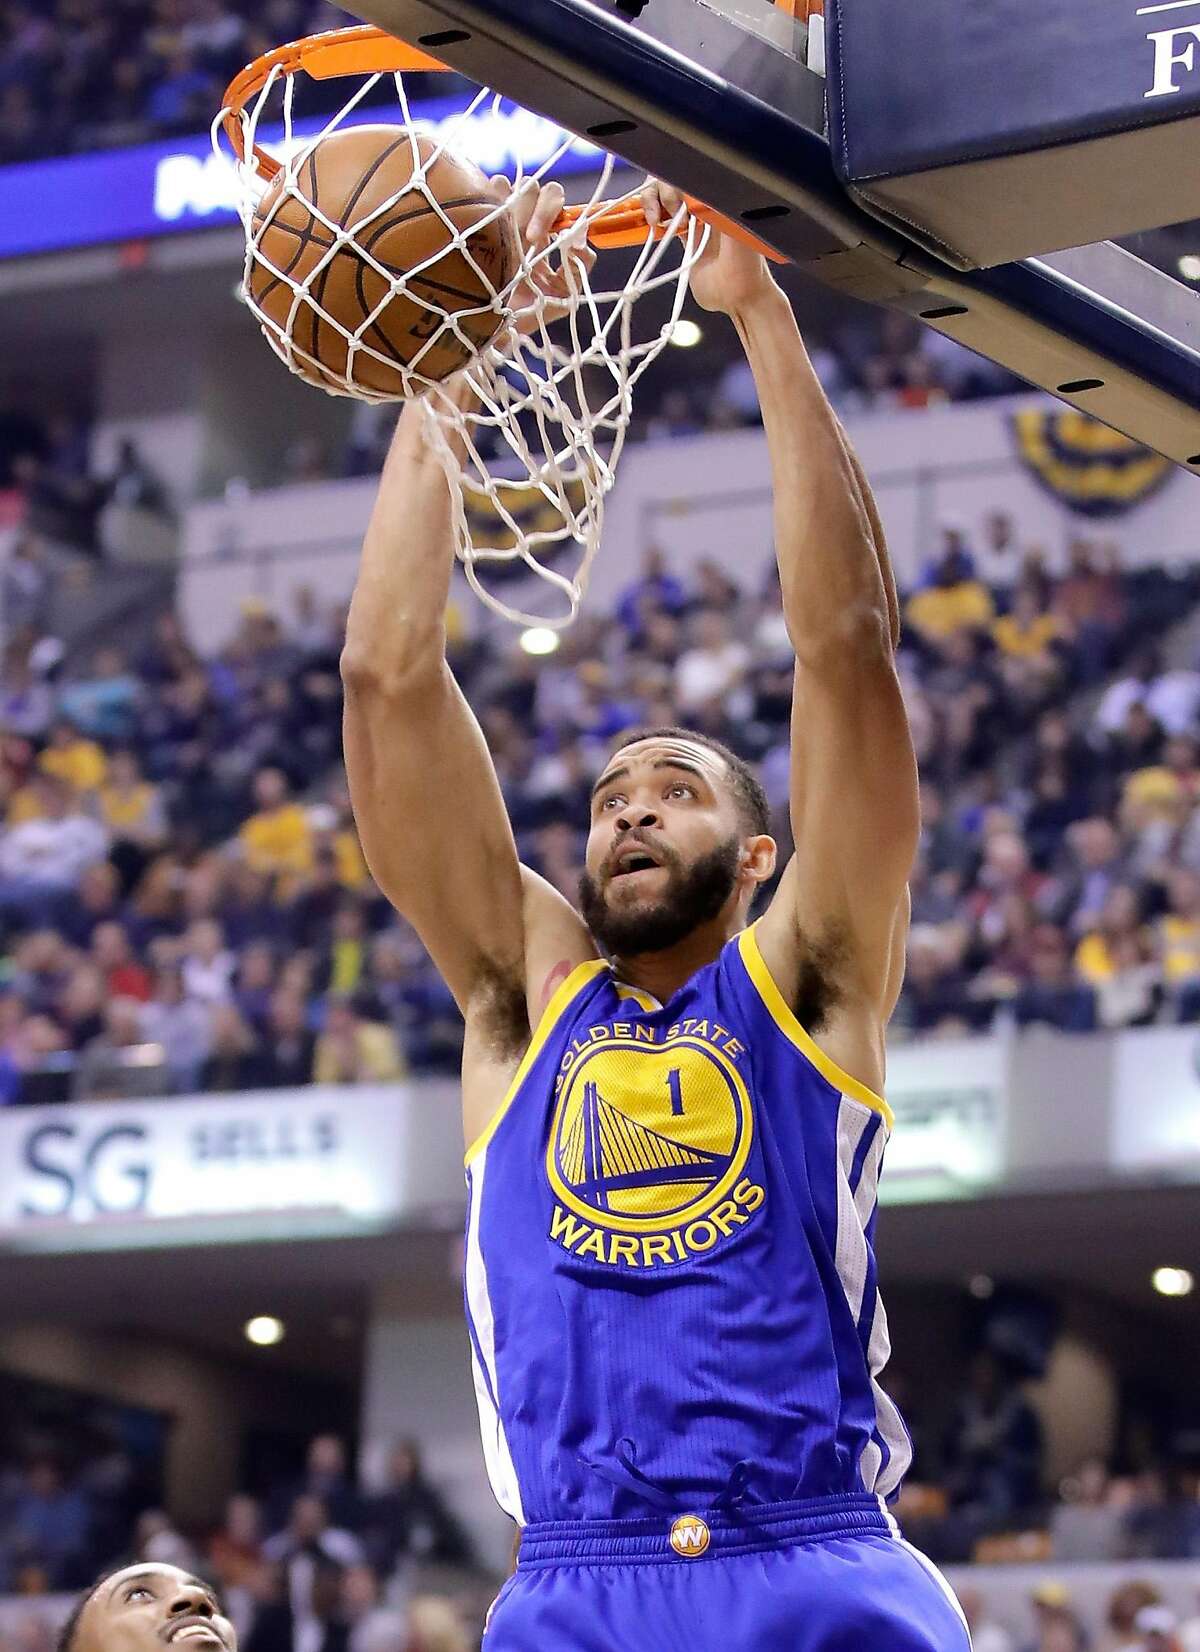 INDIANAPOLIS, IN - NOVEMBER 21: JaVale McGee #1 of the Golden State Warriors dunks the ball during the game against the Indiana Pacers at Bankers Life Fieldhouse on November 21, 2016 in Indianapolis, Indiana. NOTE TO USER: User expressly acknowledges and agrees that, by downloading and or using this photograph, User is consenting to the terms and conditions of the Getty Images License Agreement (Photo by Andy Lyons/Getty Images)